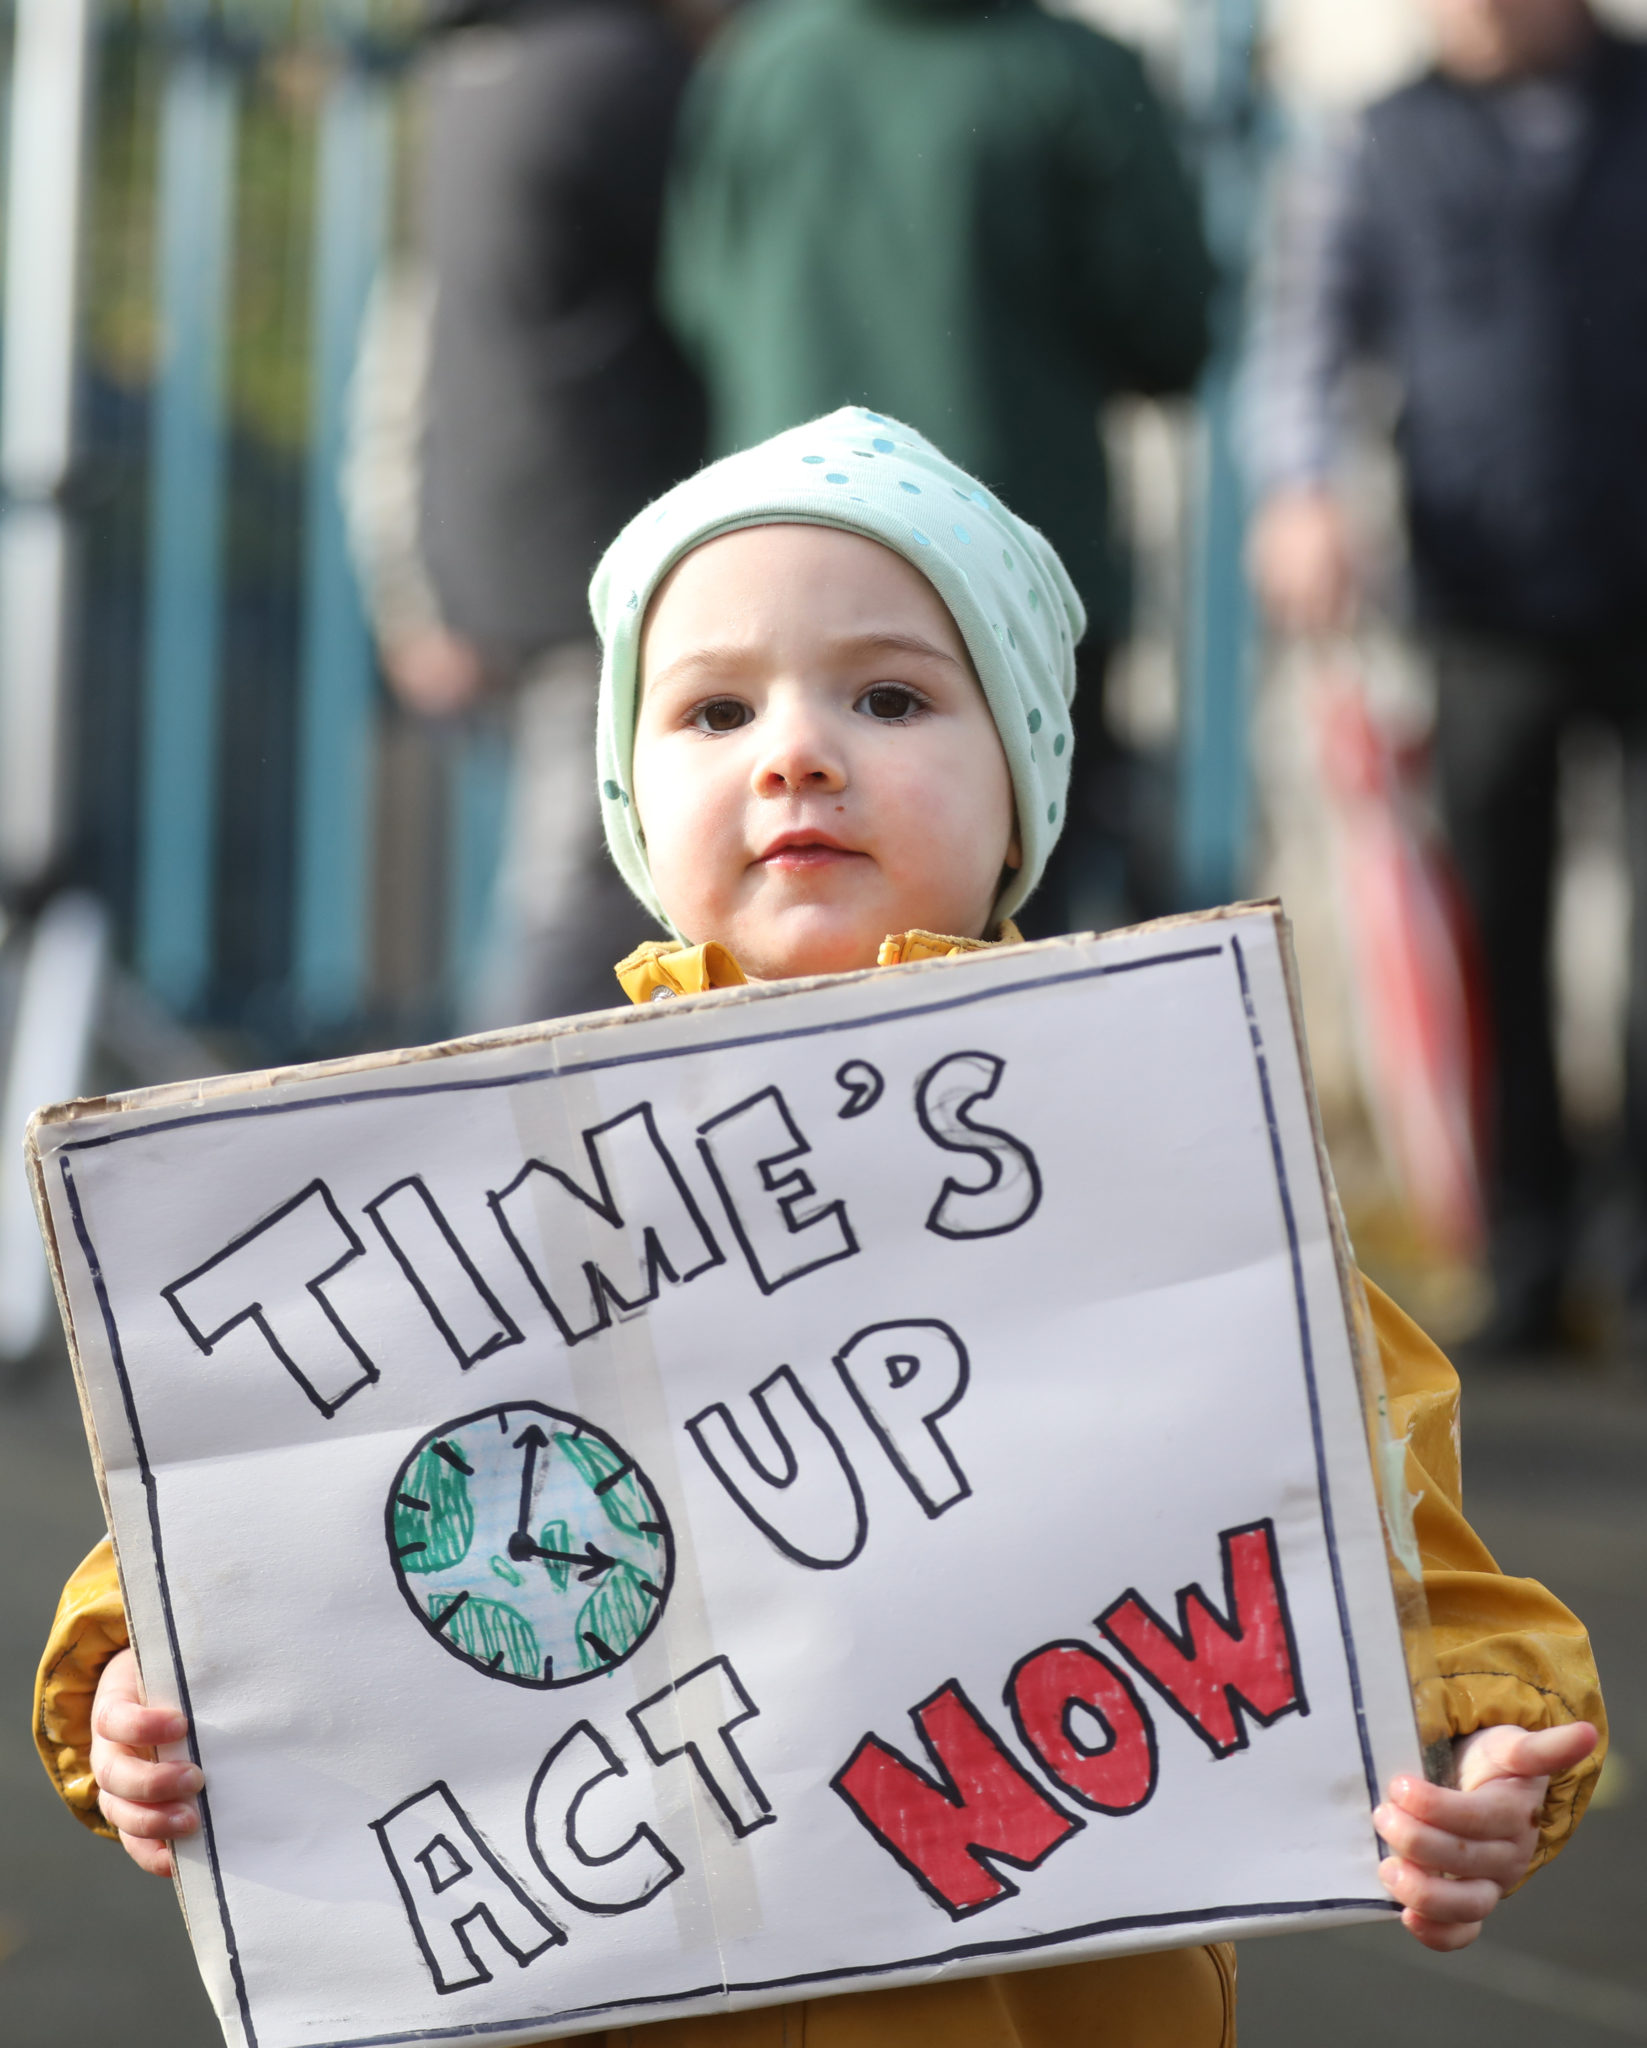 April Twyford-Hynes, aged 20 months, tells the World – ‘Time’s Up, Act Now,’ as she takes part in a Climate Action march in Dublin, 06-11-2021. Image: Leah Farrell/RollingNews